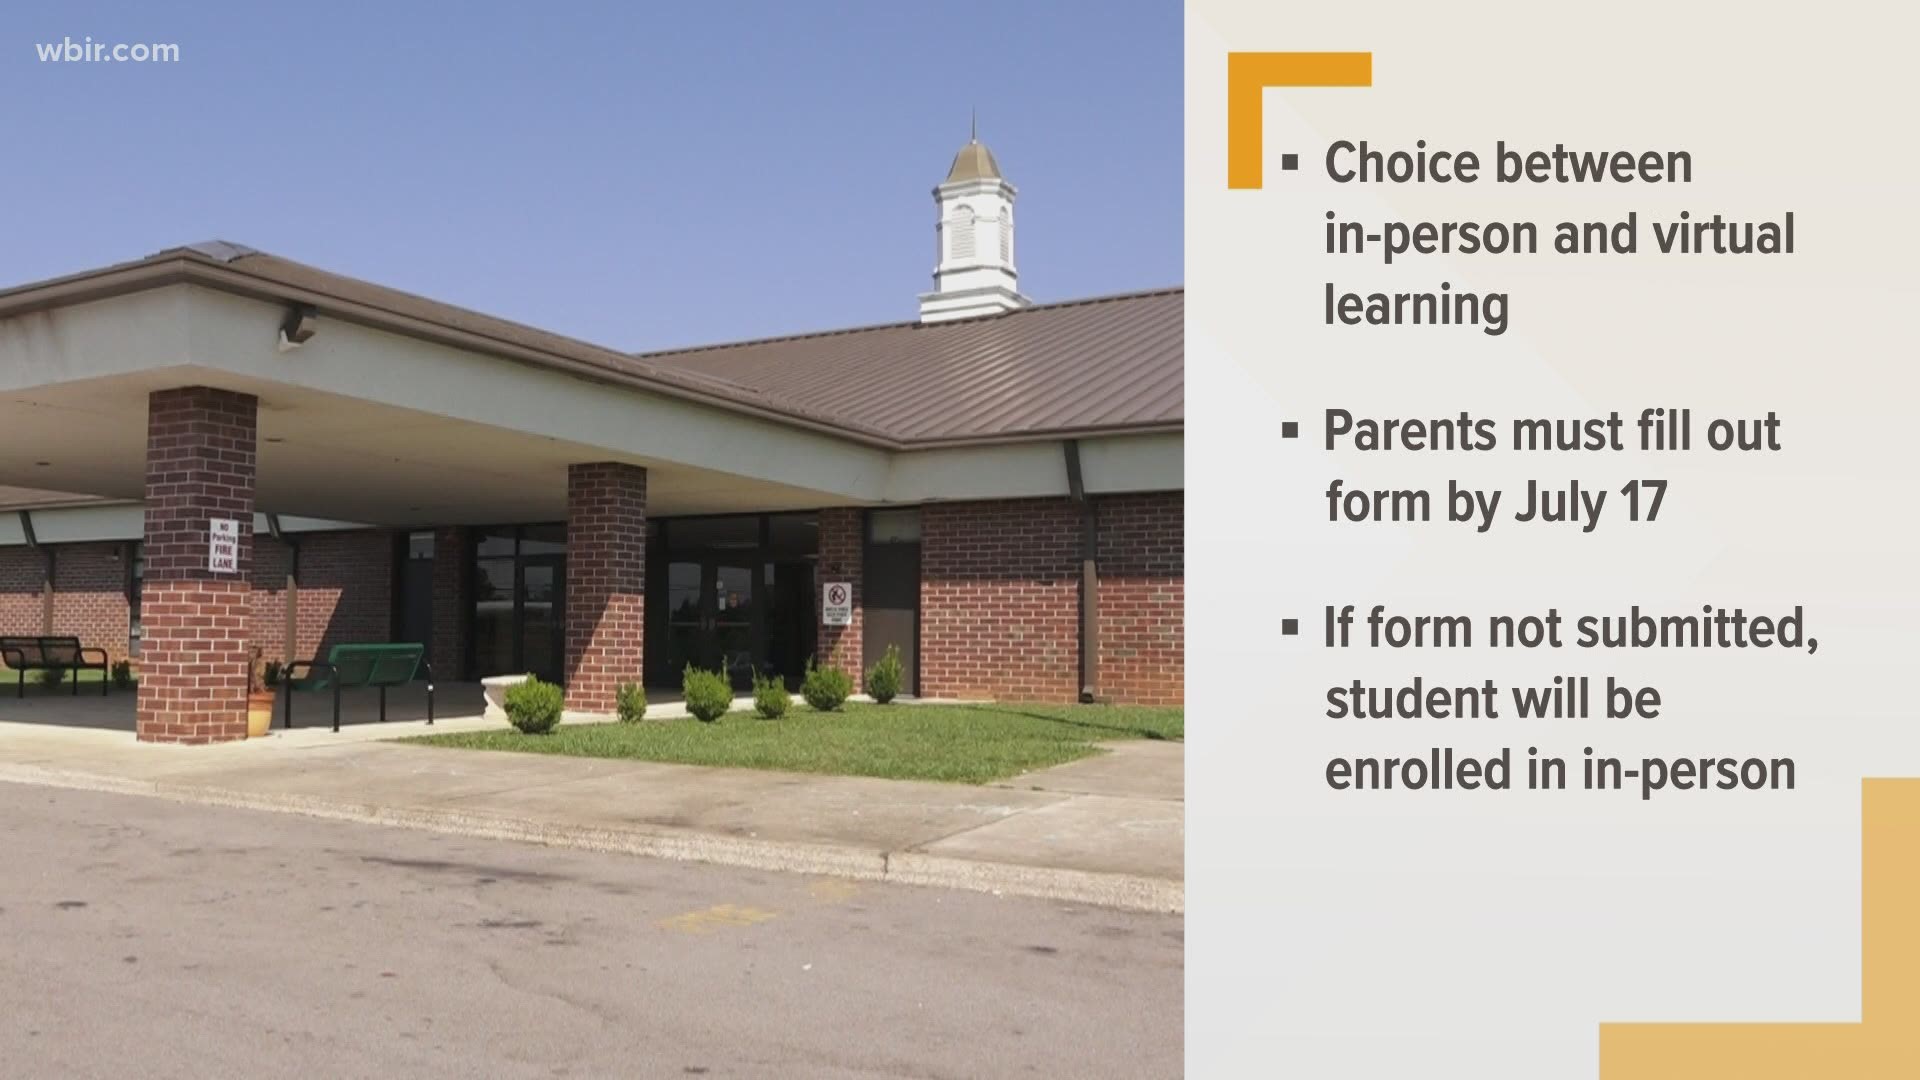 Blount County Schools said parents can choose between a traditional and virtual option for their students.